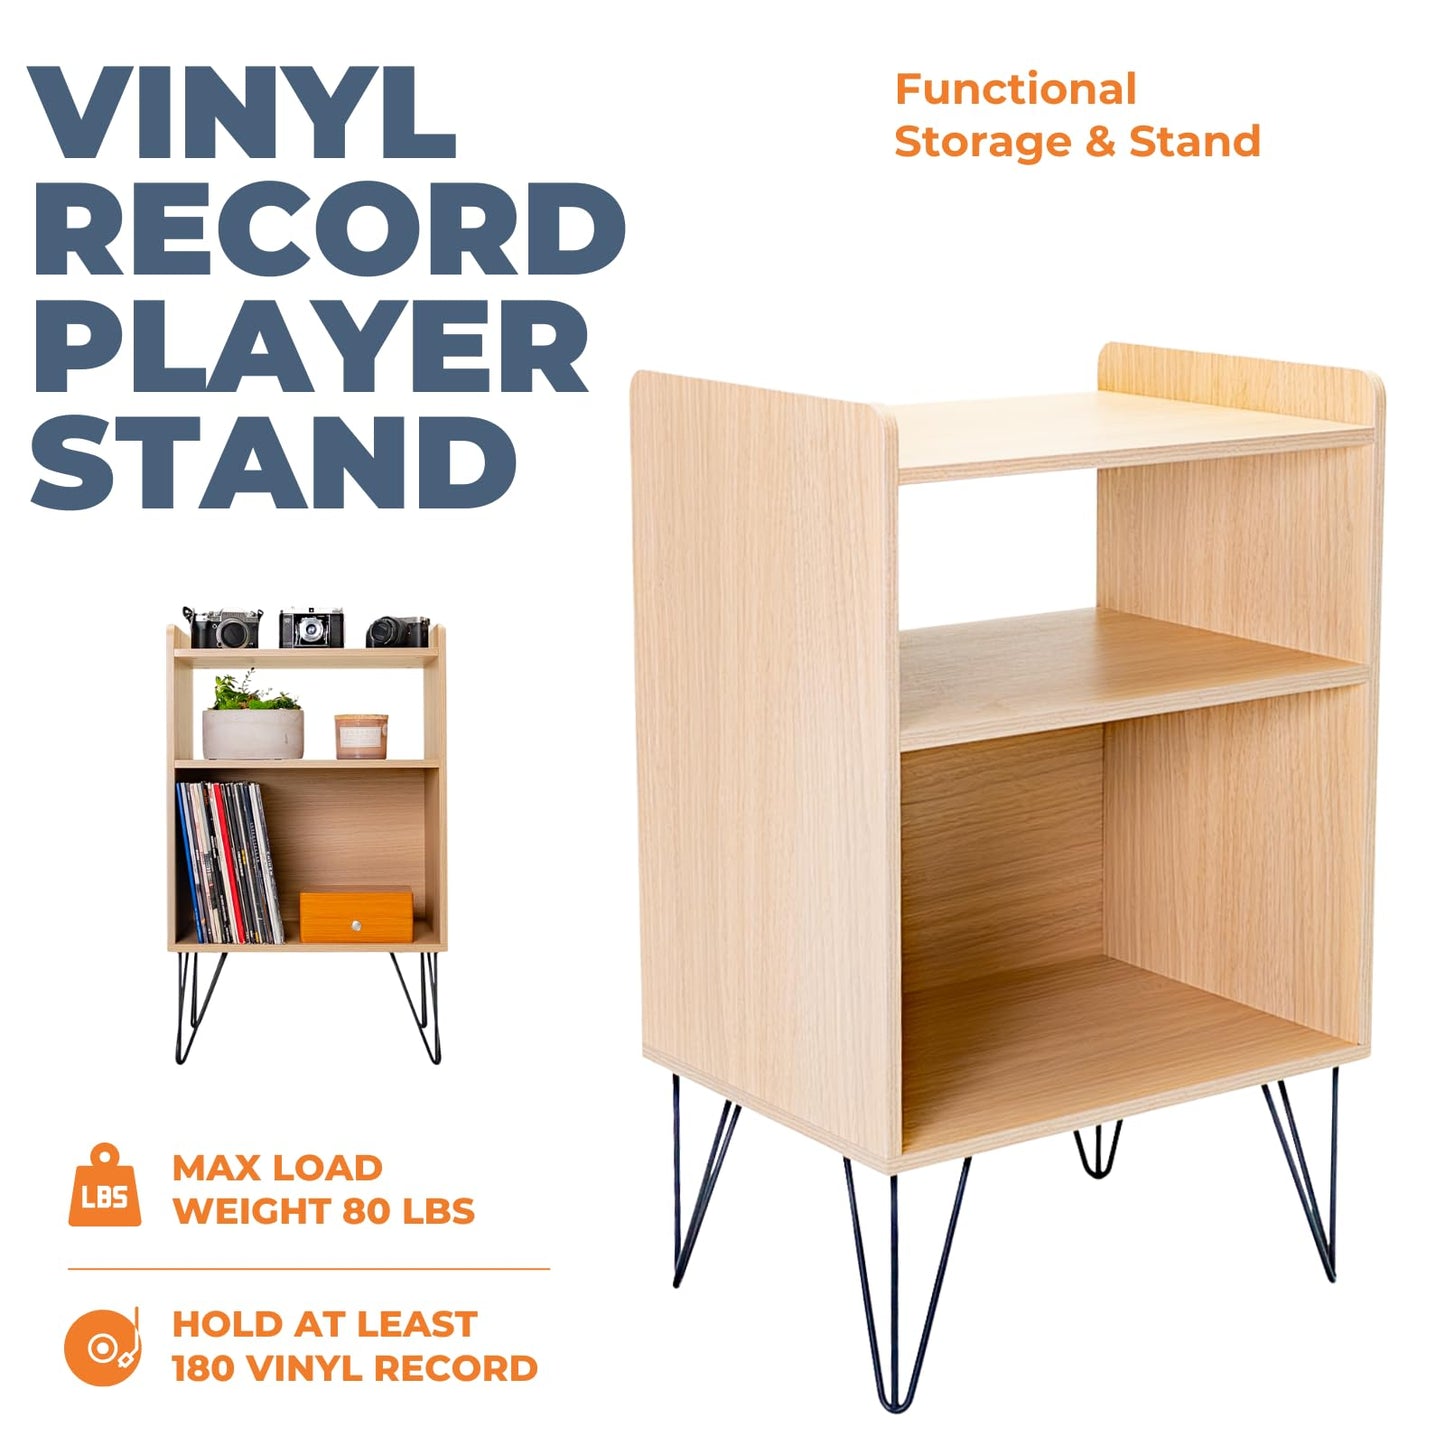 CalmHouse Record Player Stand with Metal Legs - 3 Tier Turntable Stand - 21 x 16 x 33 Inches - Store Up to 180 Albums - Perfect for Living Room, Office (Light Beech Wood)